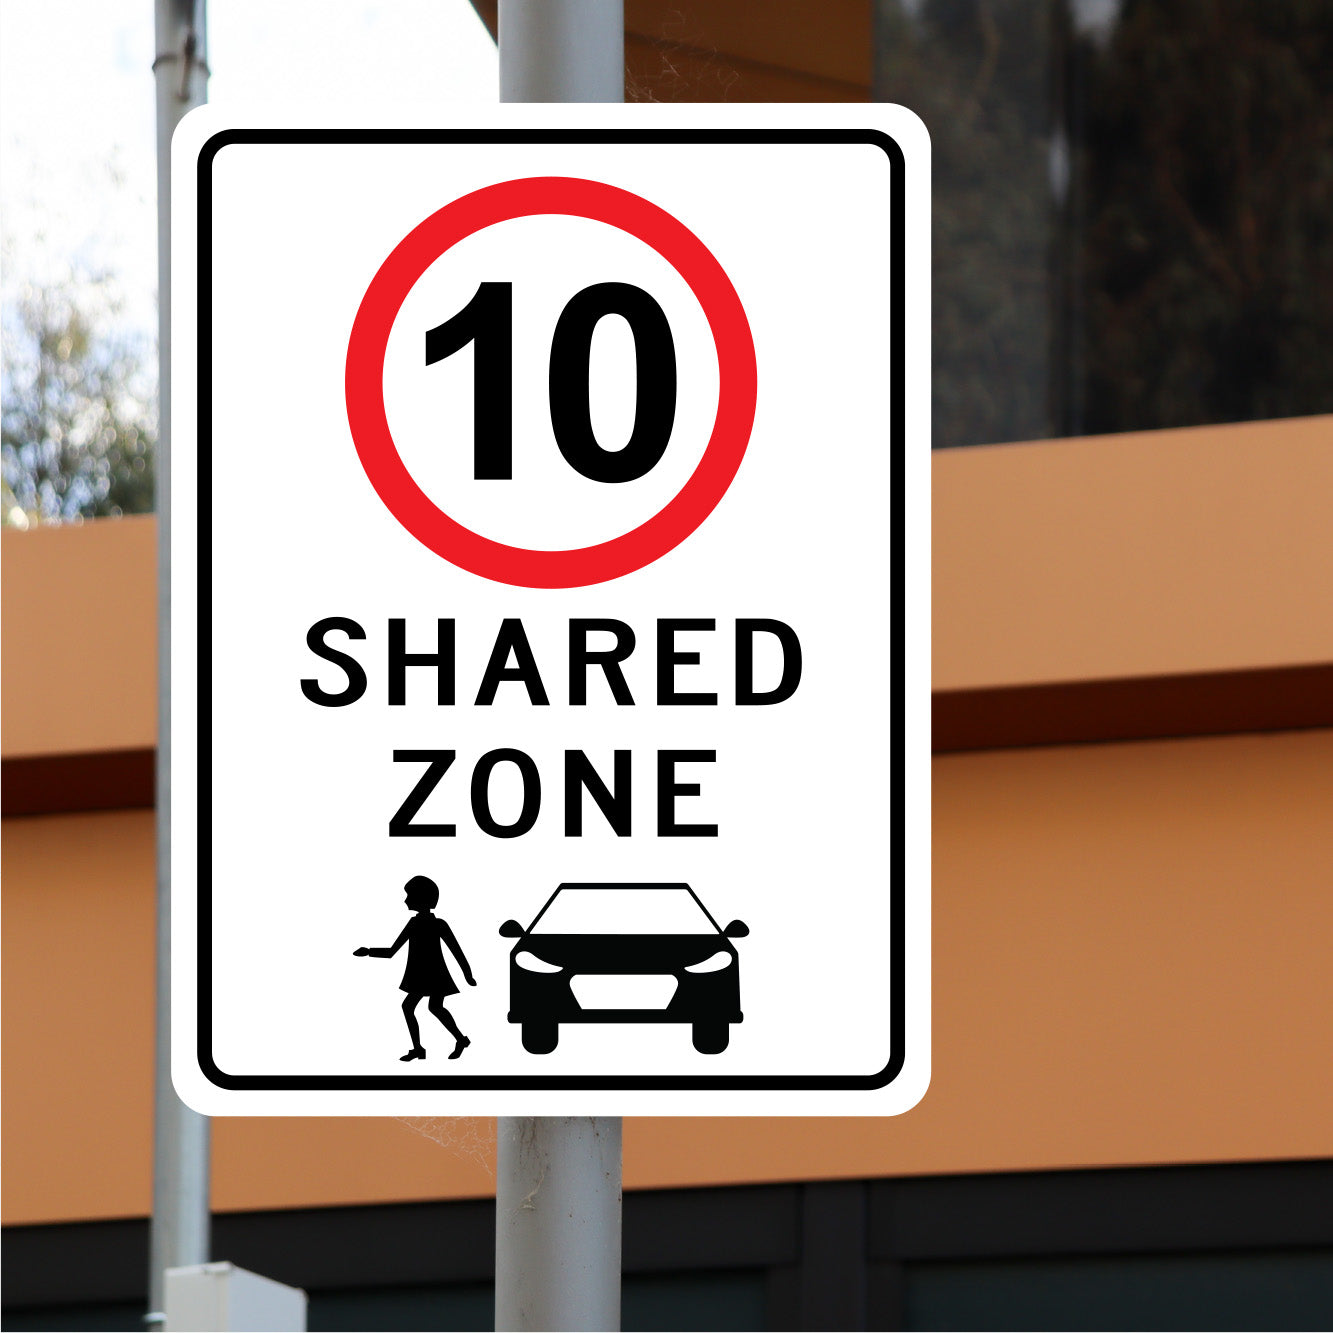 SHARED ZONE 10km Speed Limit SIGN